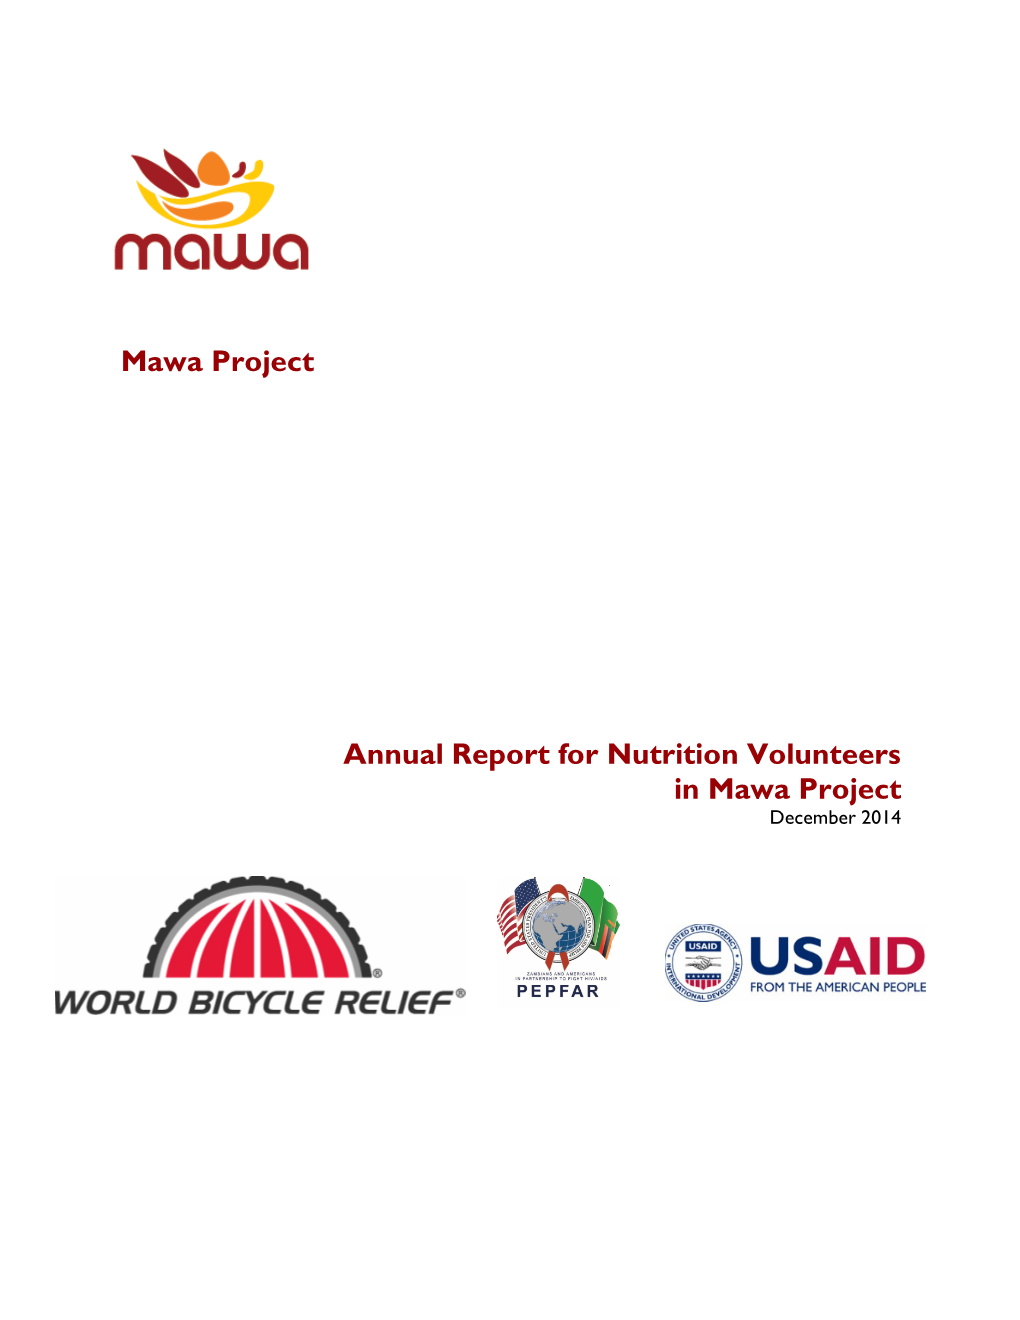 Mawa Project Annual Report for Nutrition Volunteers in Mawa Project